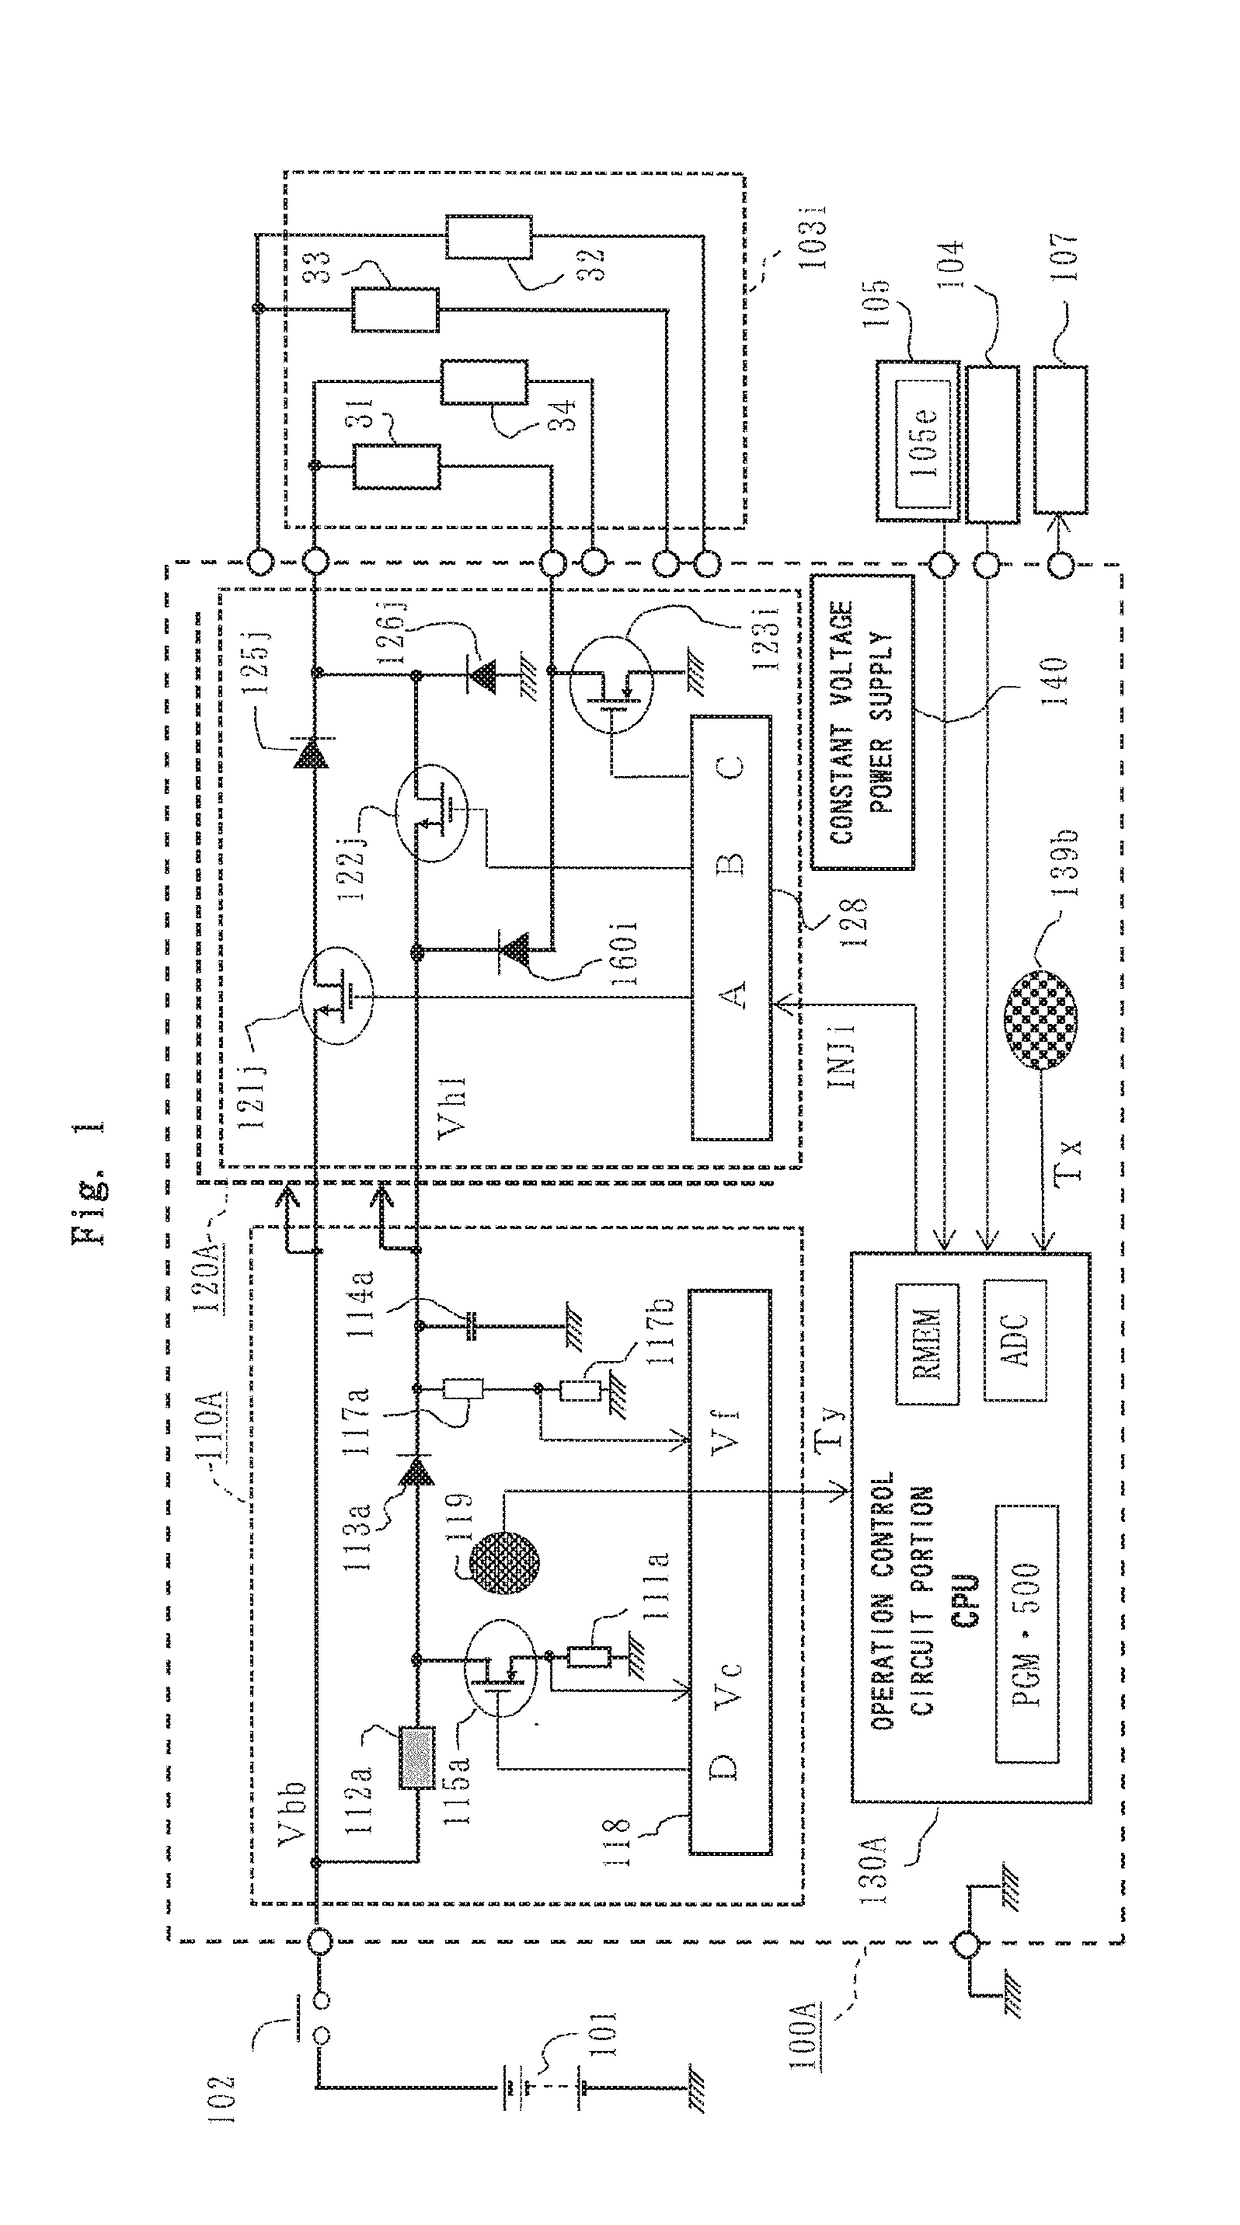 In-vehicle engine control apparatus